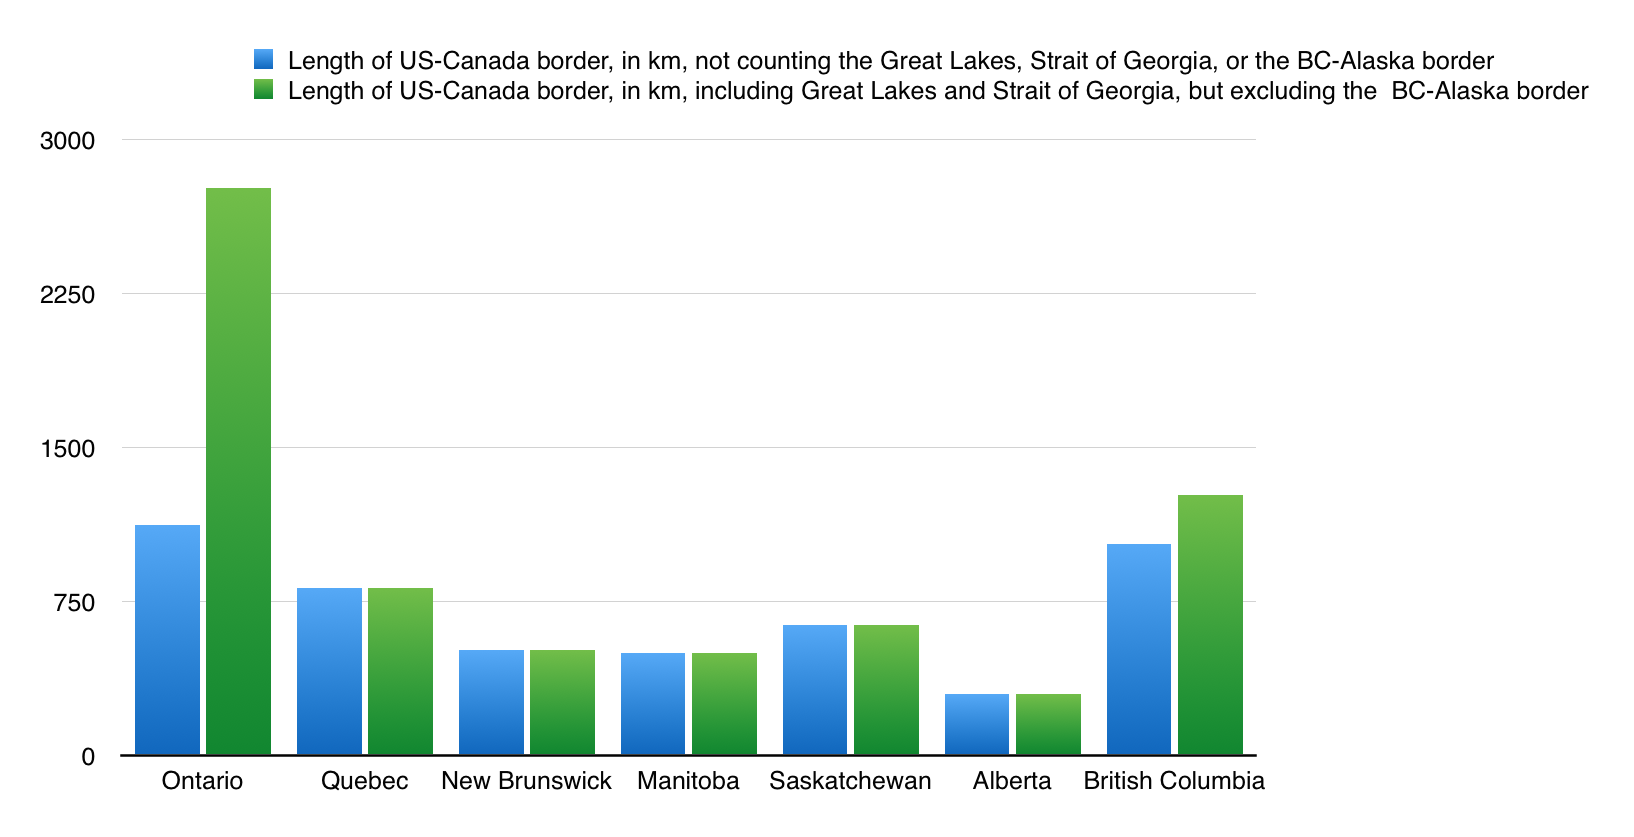 Length of US-Canada Border in Each Province